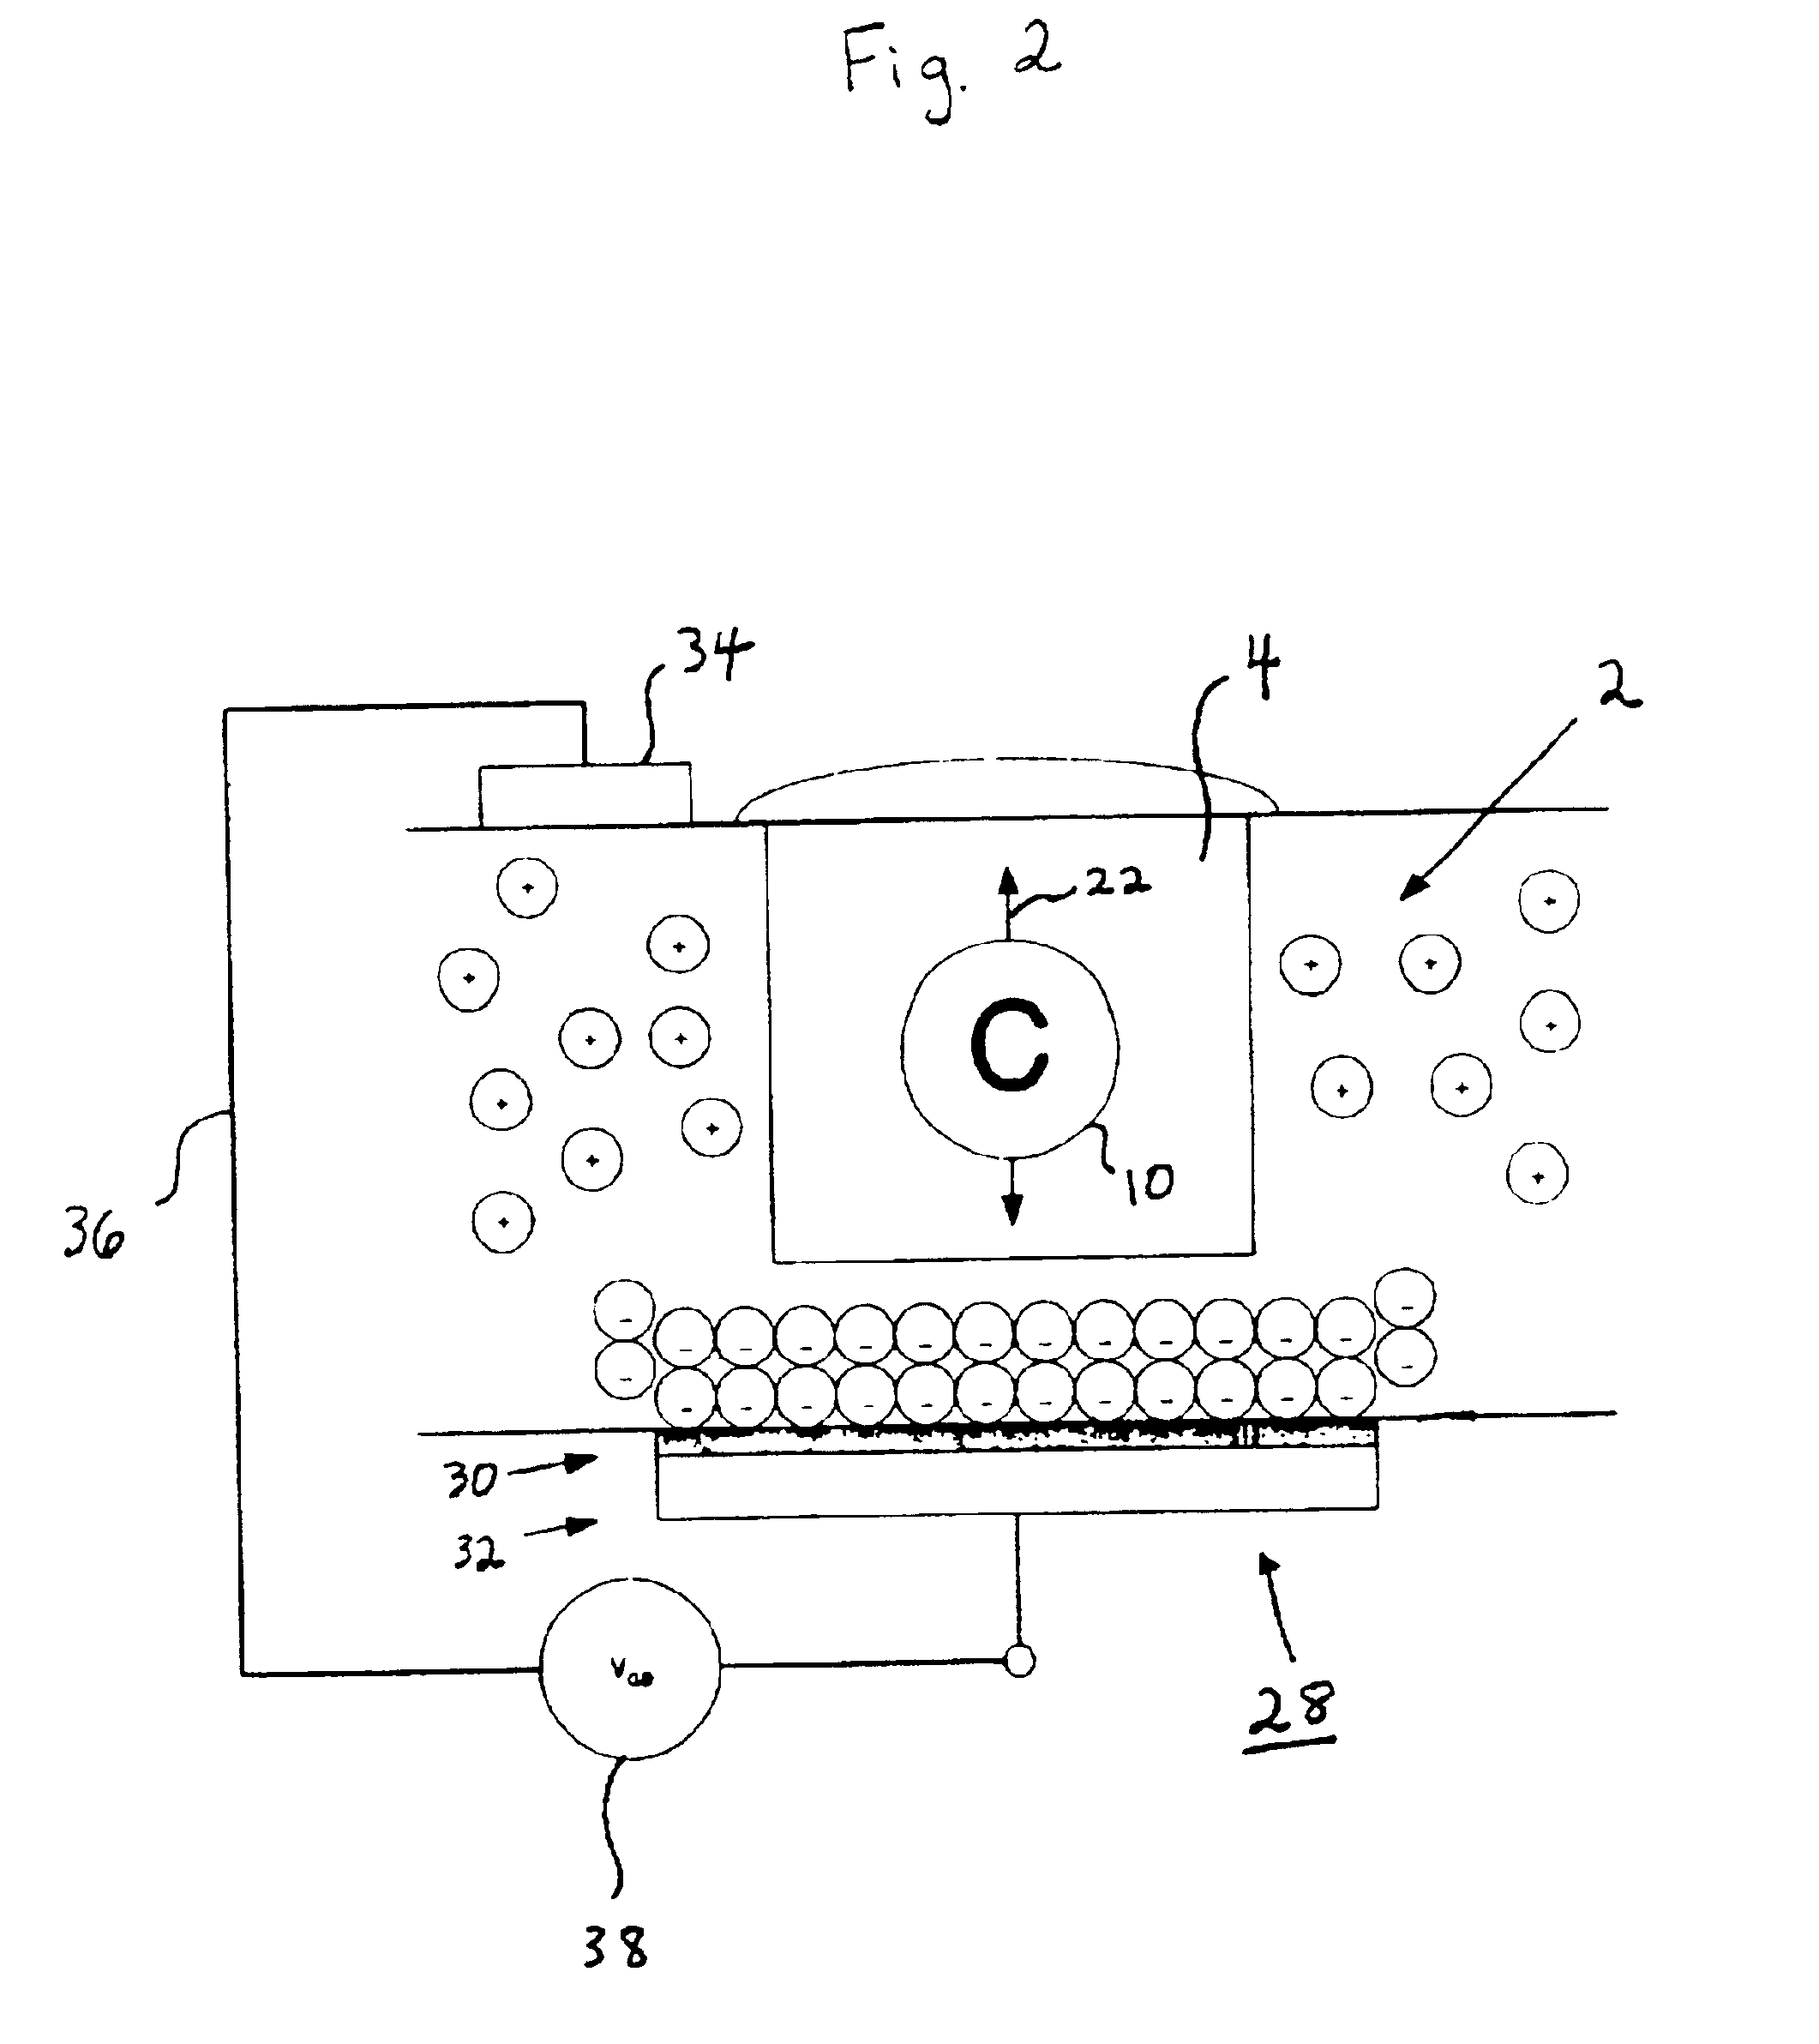 Methods and apparatus for subjecting an element to an electrical field